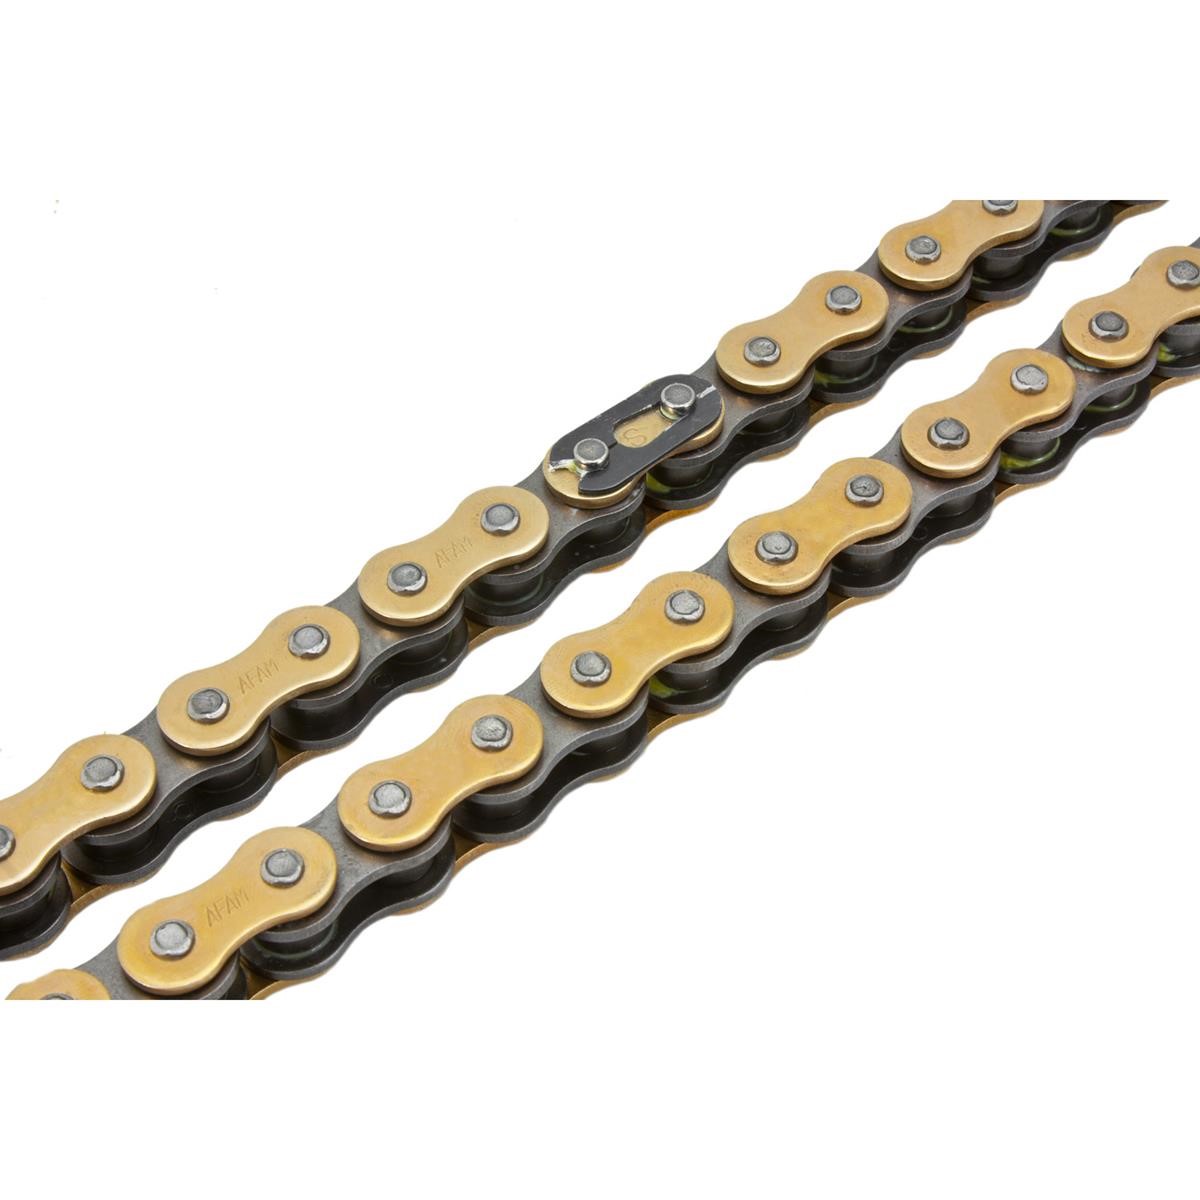 Afam Chain A428XMR X-Ring, 428 Pitch, Gold